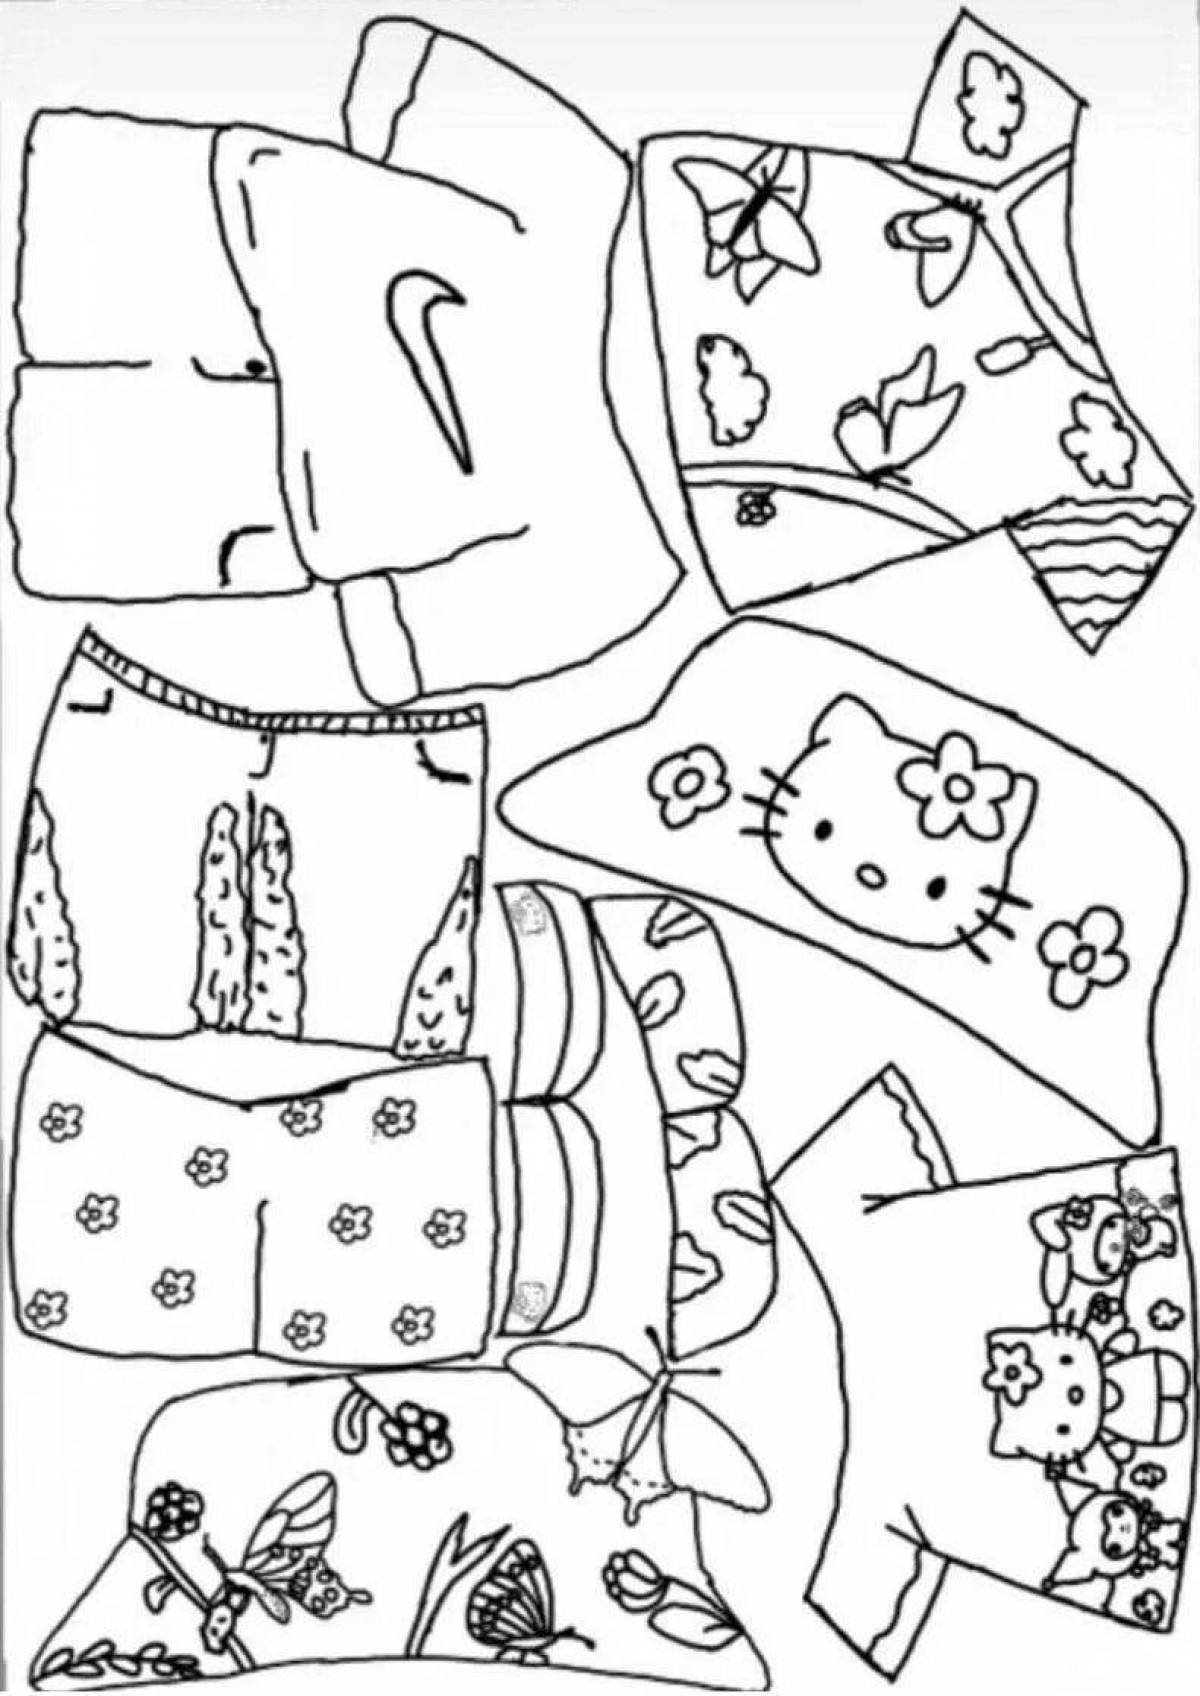 Fancy dressed duck coloring page